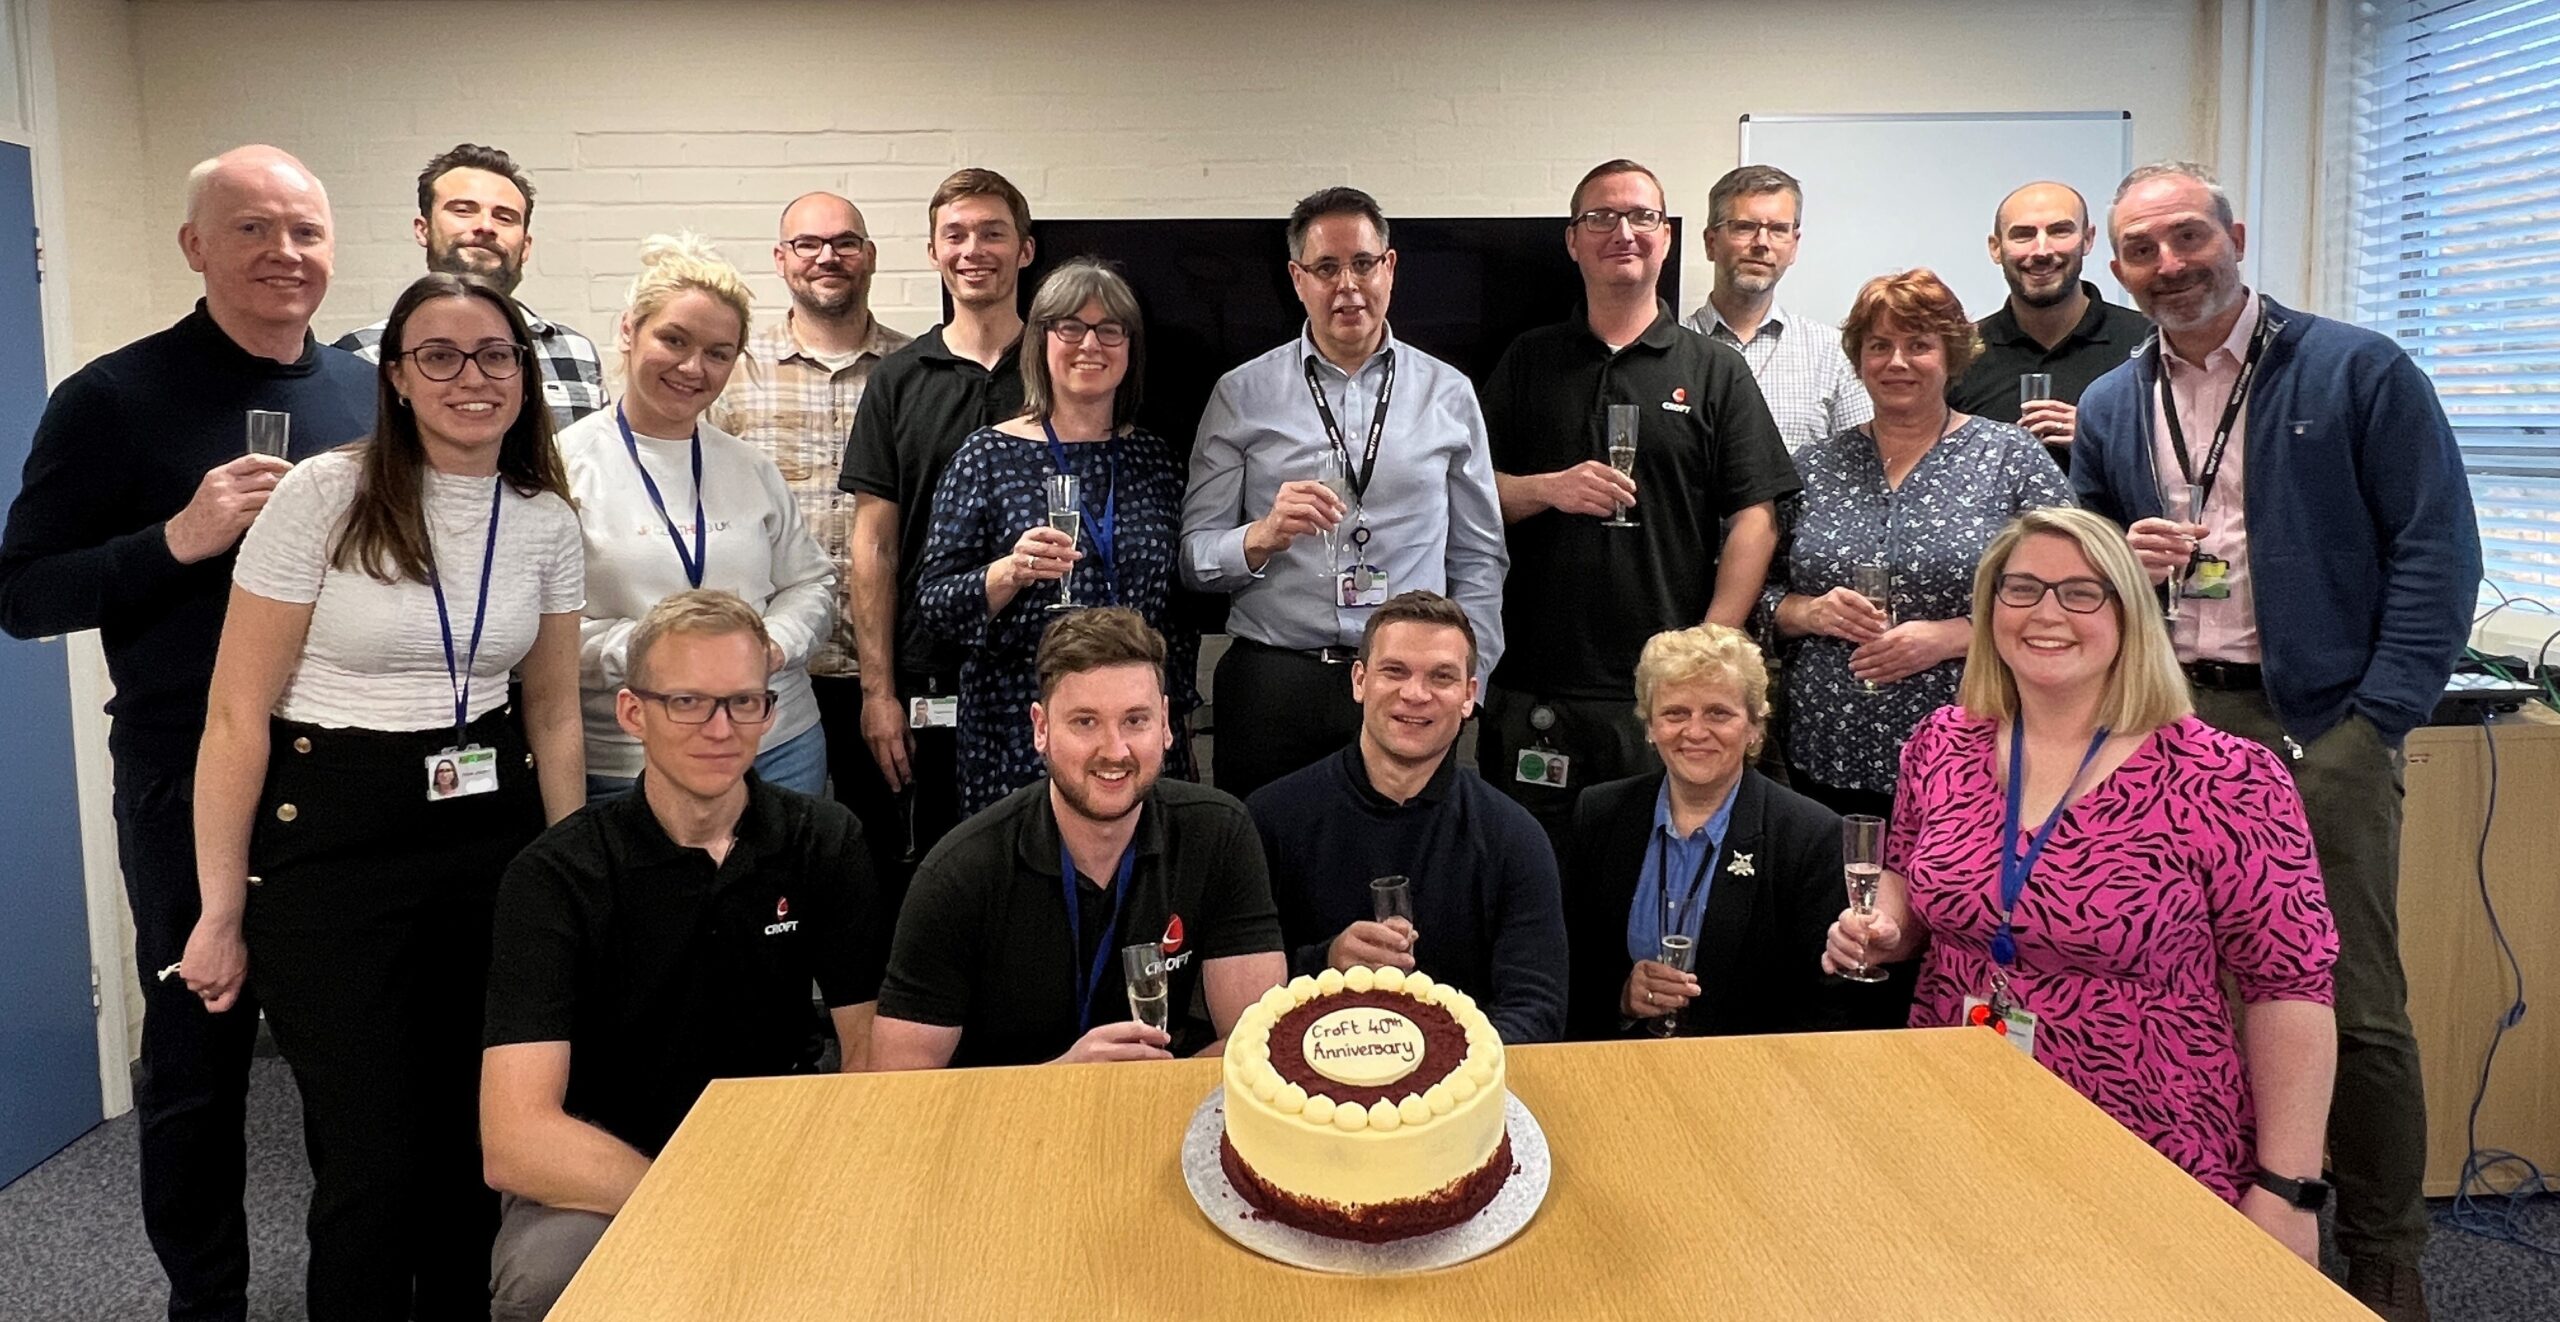 Croft Associates 40th Anniversary celebrated by the Croft Team